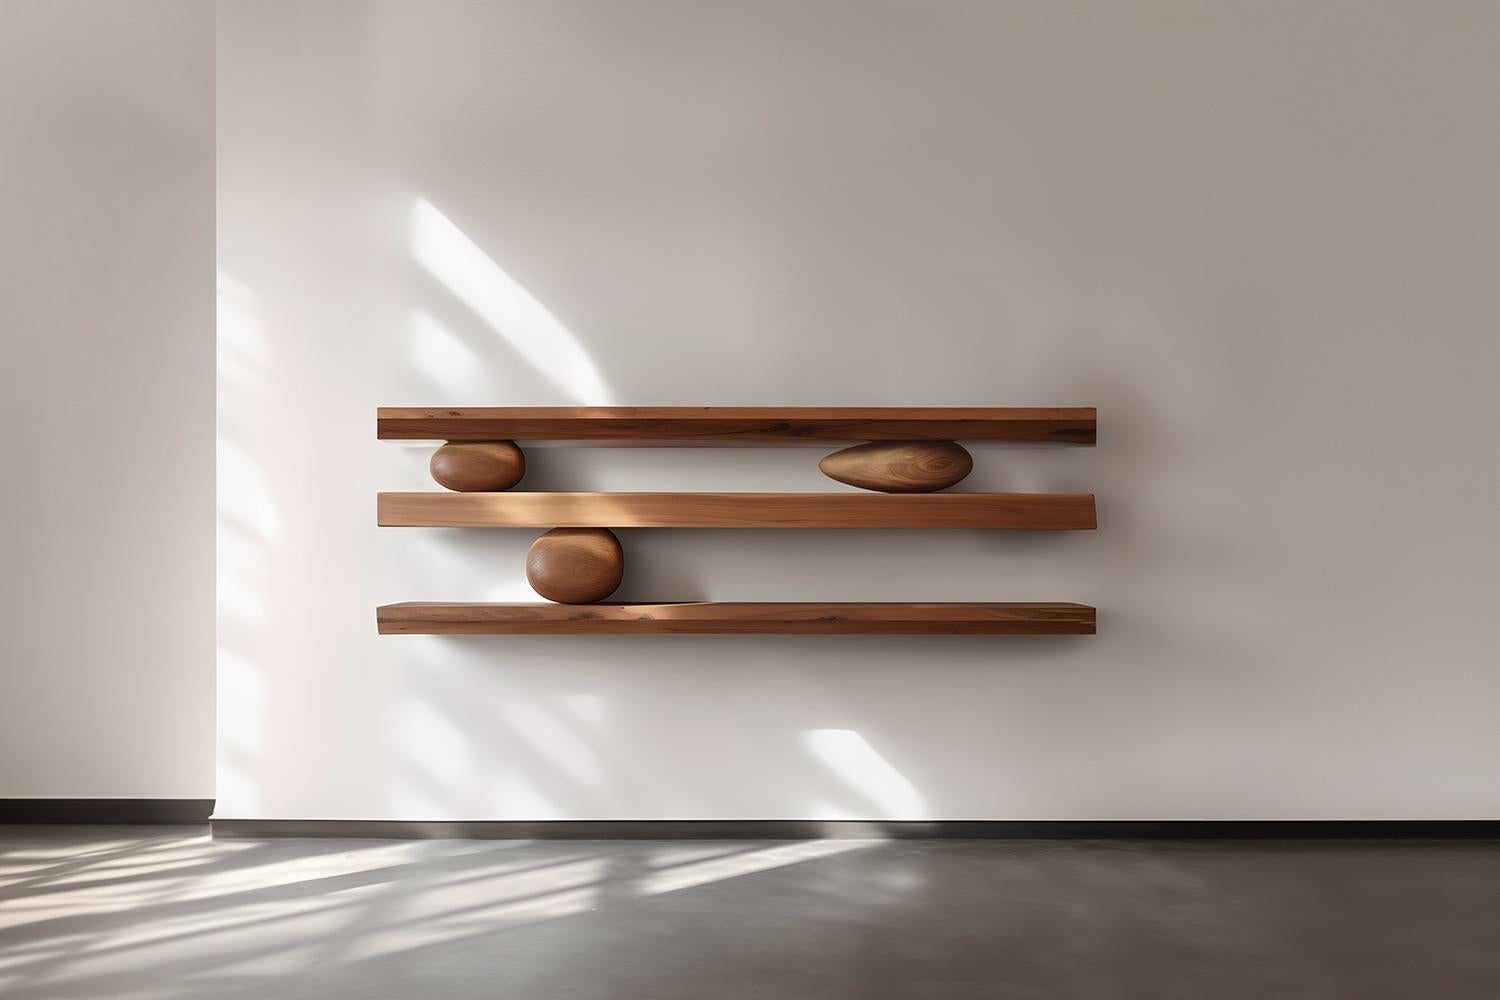 Veneer 3 Floating Shelves with 3 Sculptural Wooden Pebble Accents, Sereno by Nono For Sale